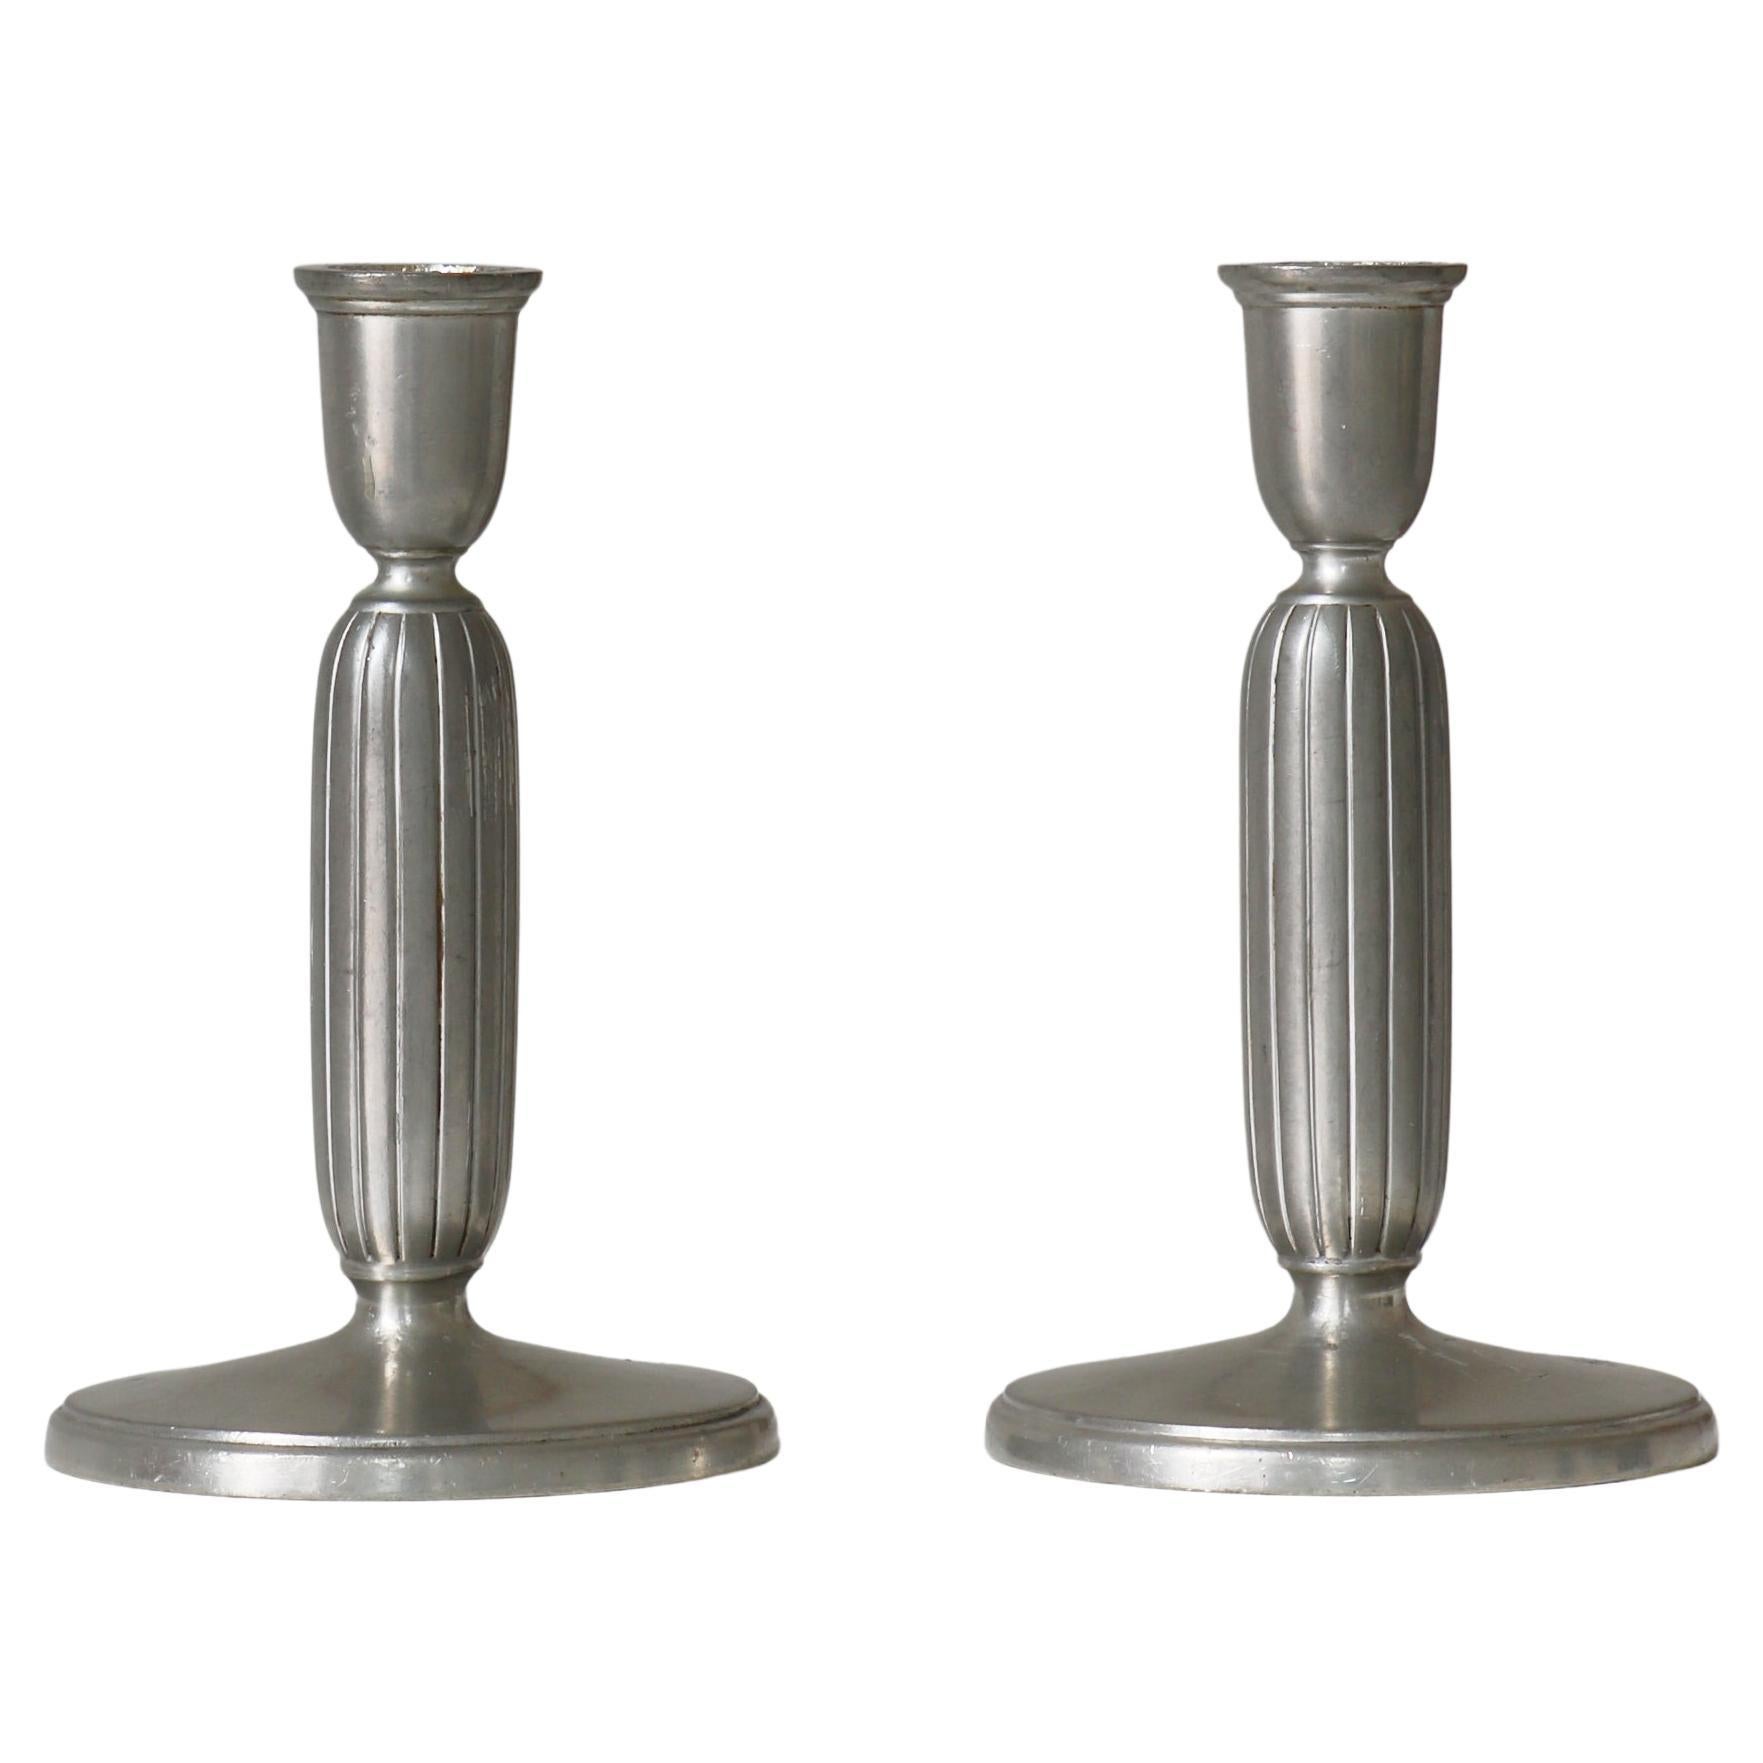 Art Deco Pewter Candlesticks by Just Andersen "Model 2574", 1930s For Sale